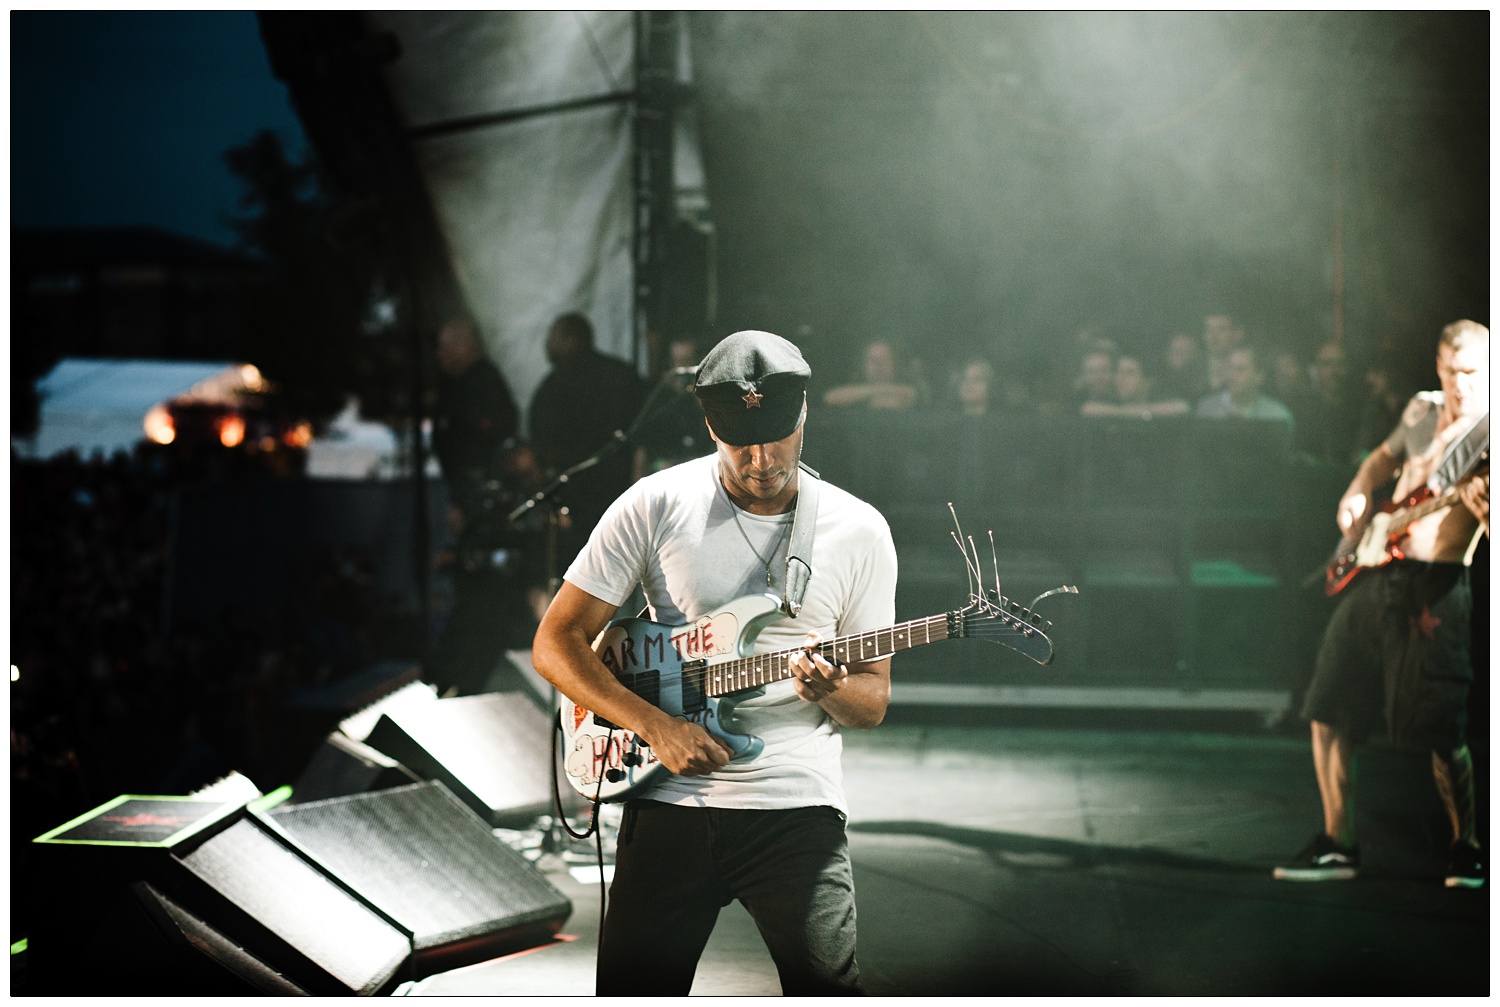 Tom Morello playing the Arm the Homeless guitar at the Finsbury Park gig, Tim Commerford in the background on bass